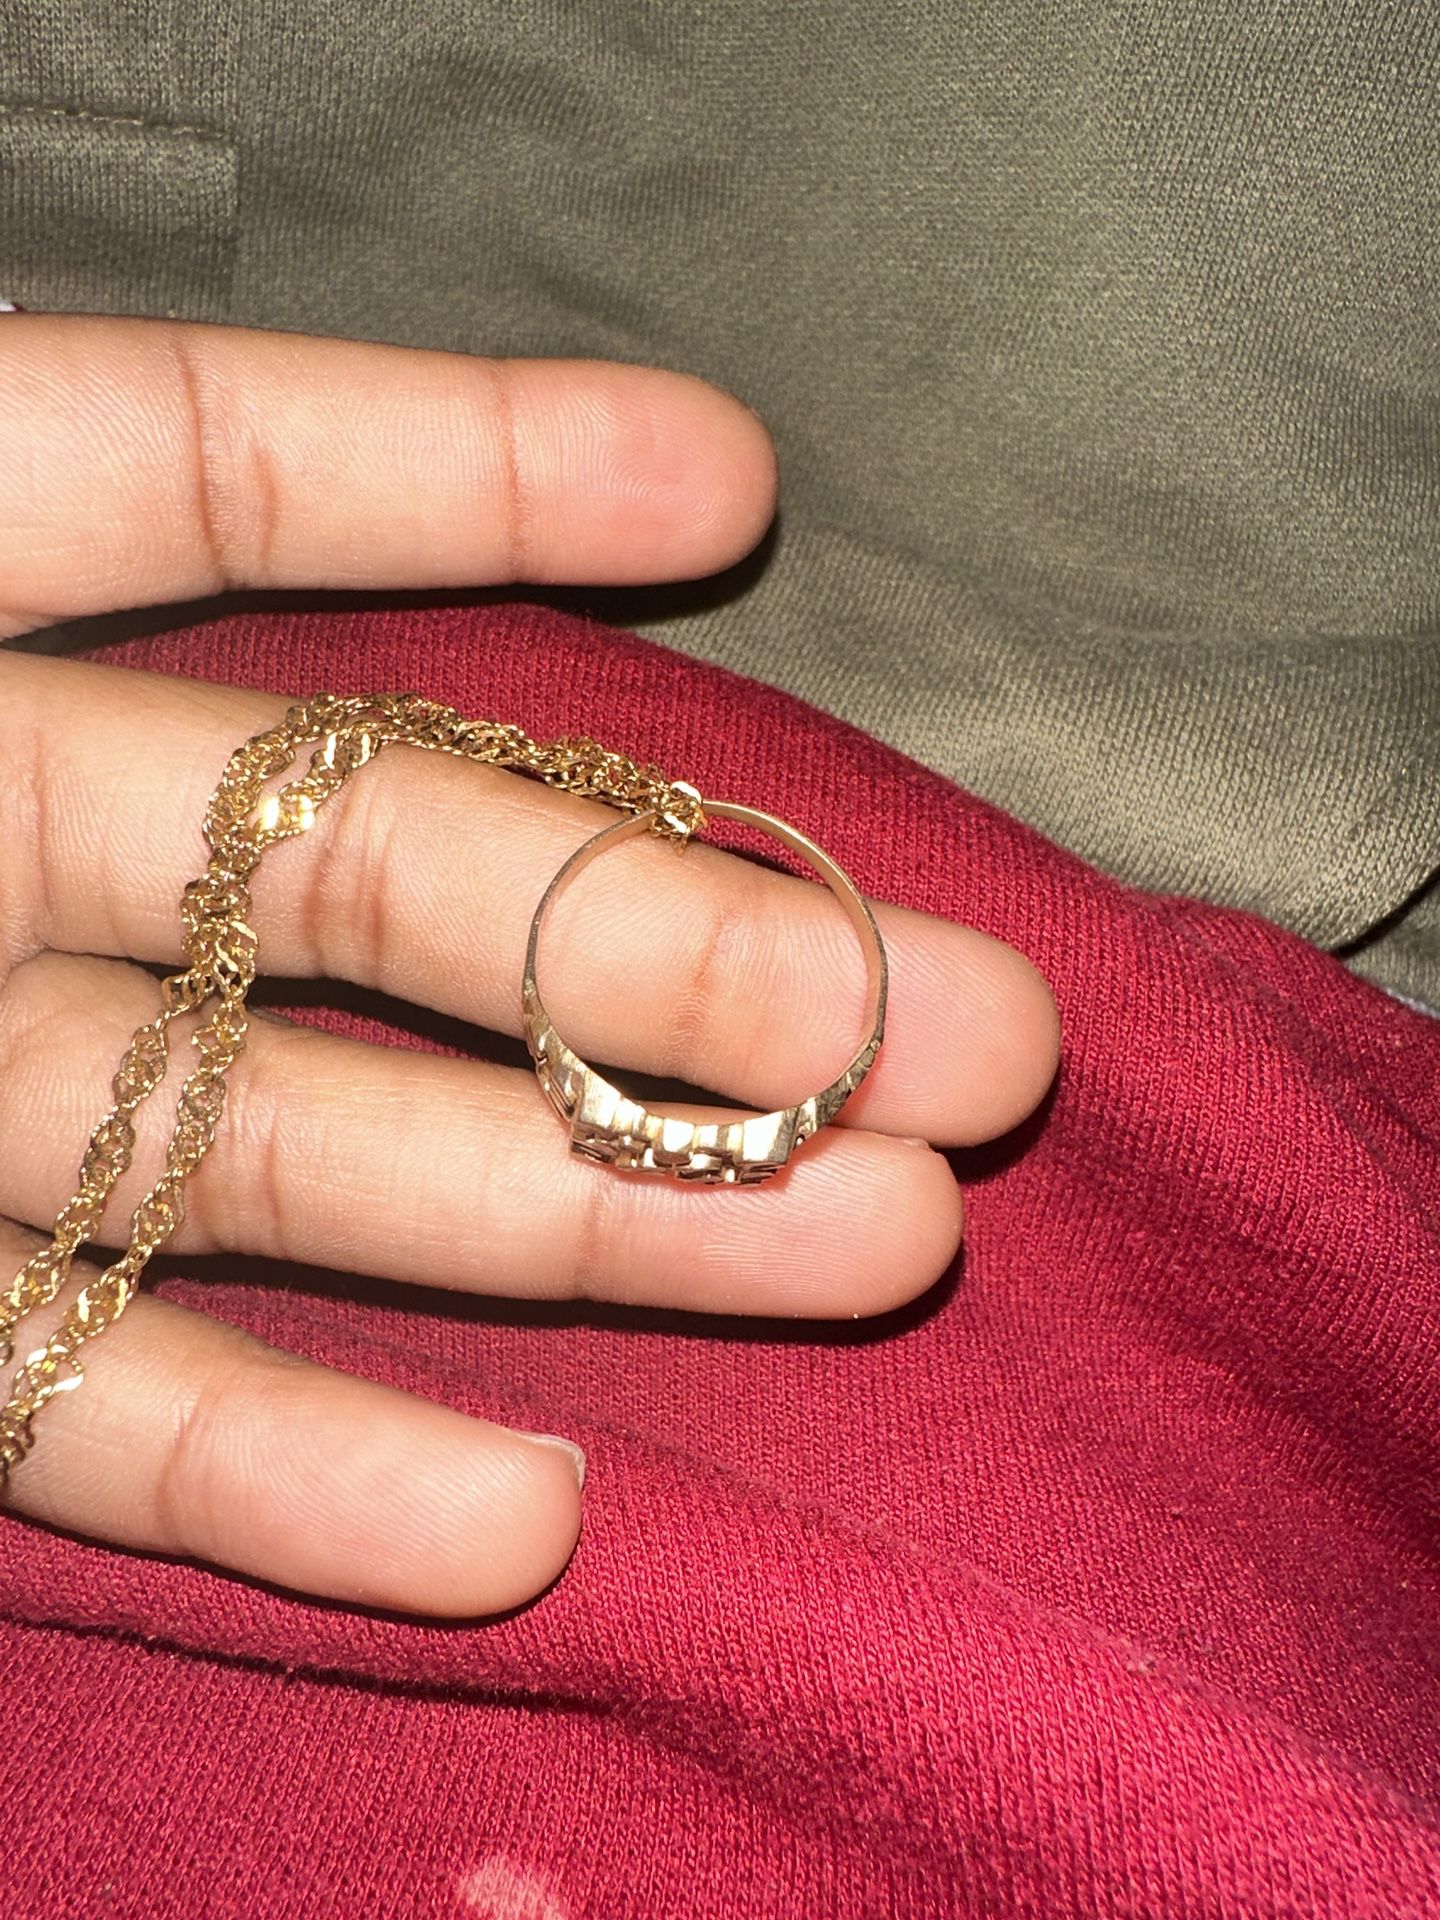 Nugget Ring & Chain $105 FOR BOTH TOGETHER 